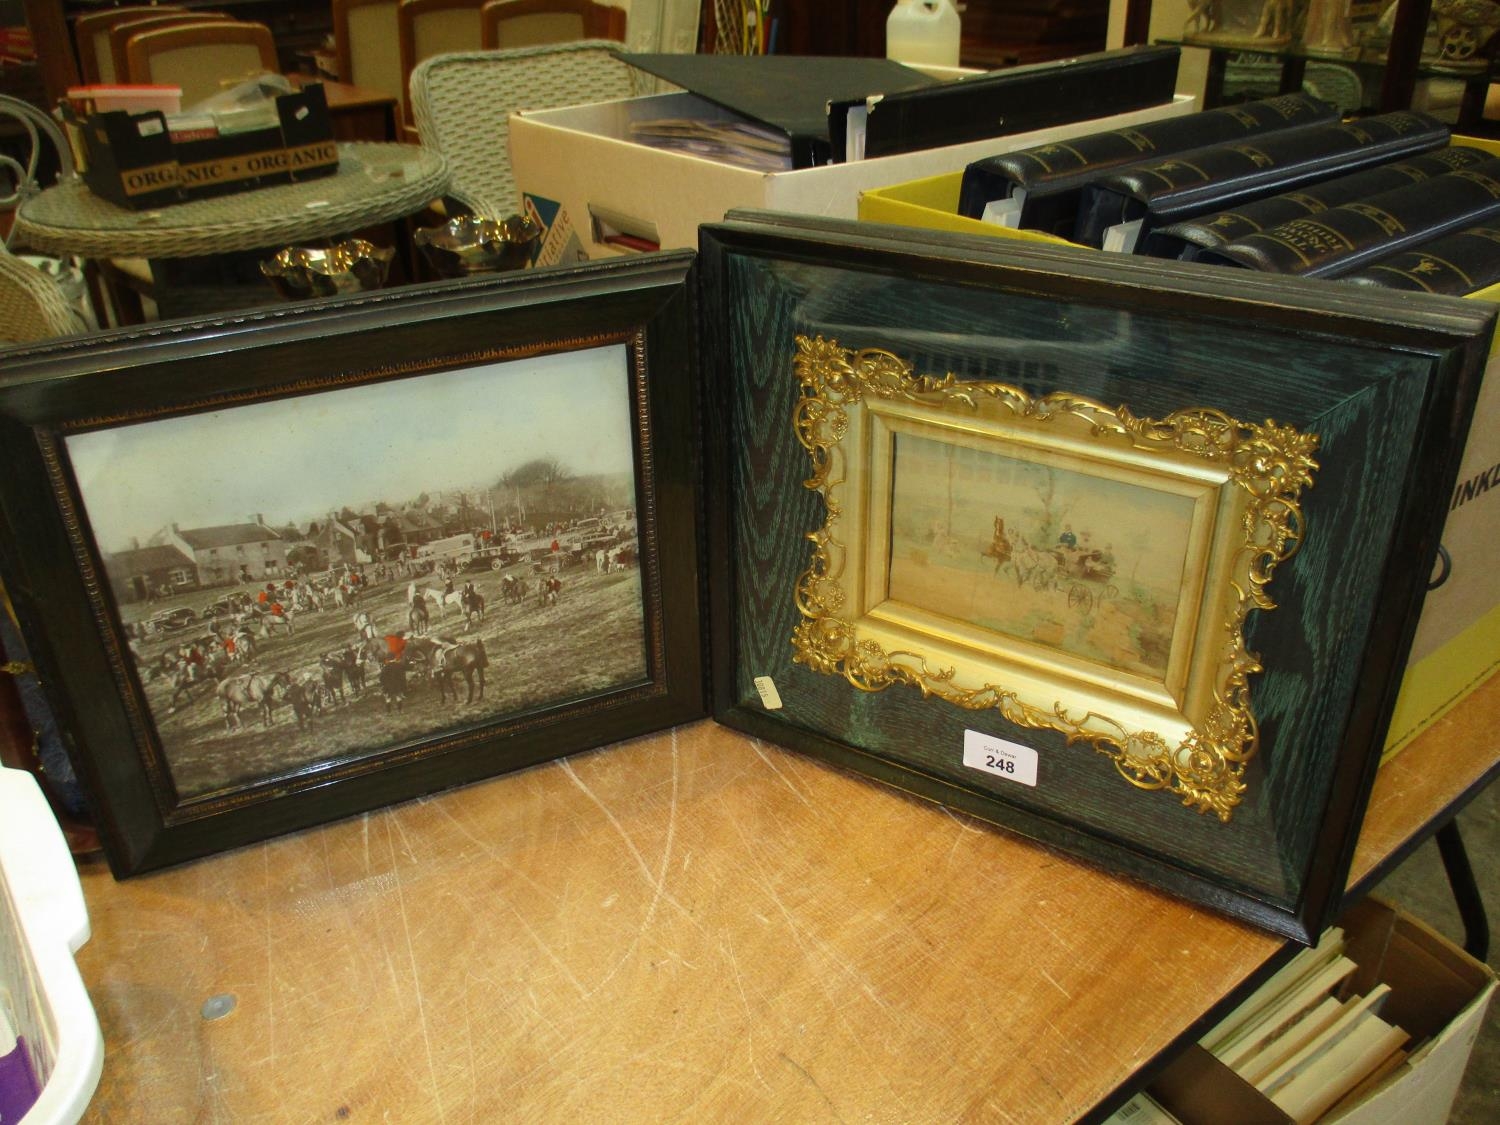 Ornately Framed Picture of a Horse and Carriage Ride, along with a Photograph of a Hunt